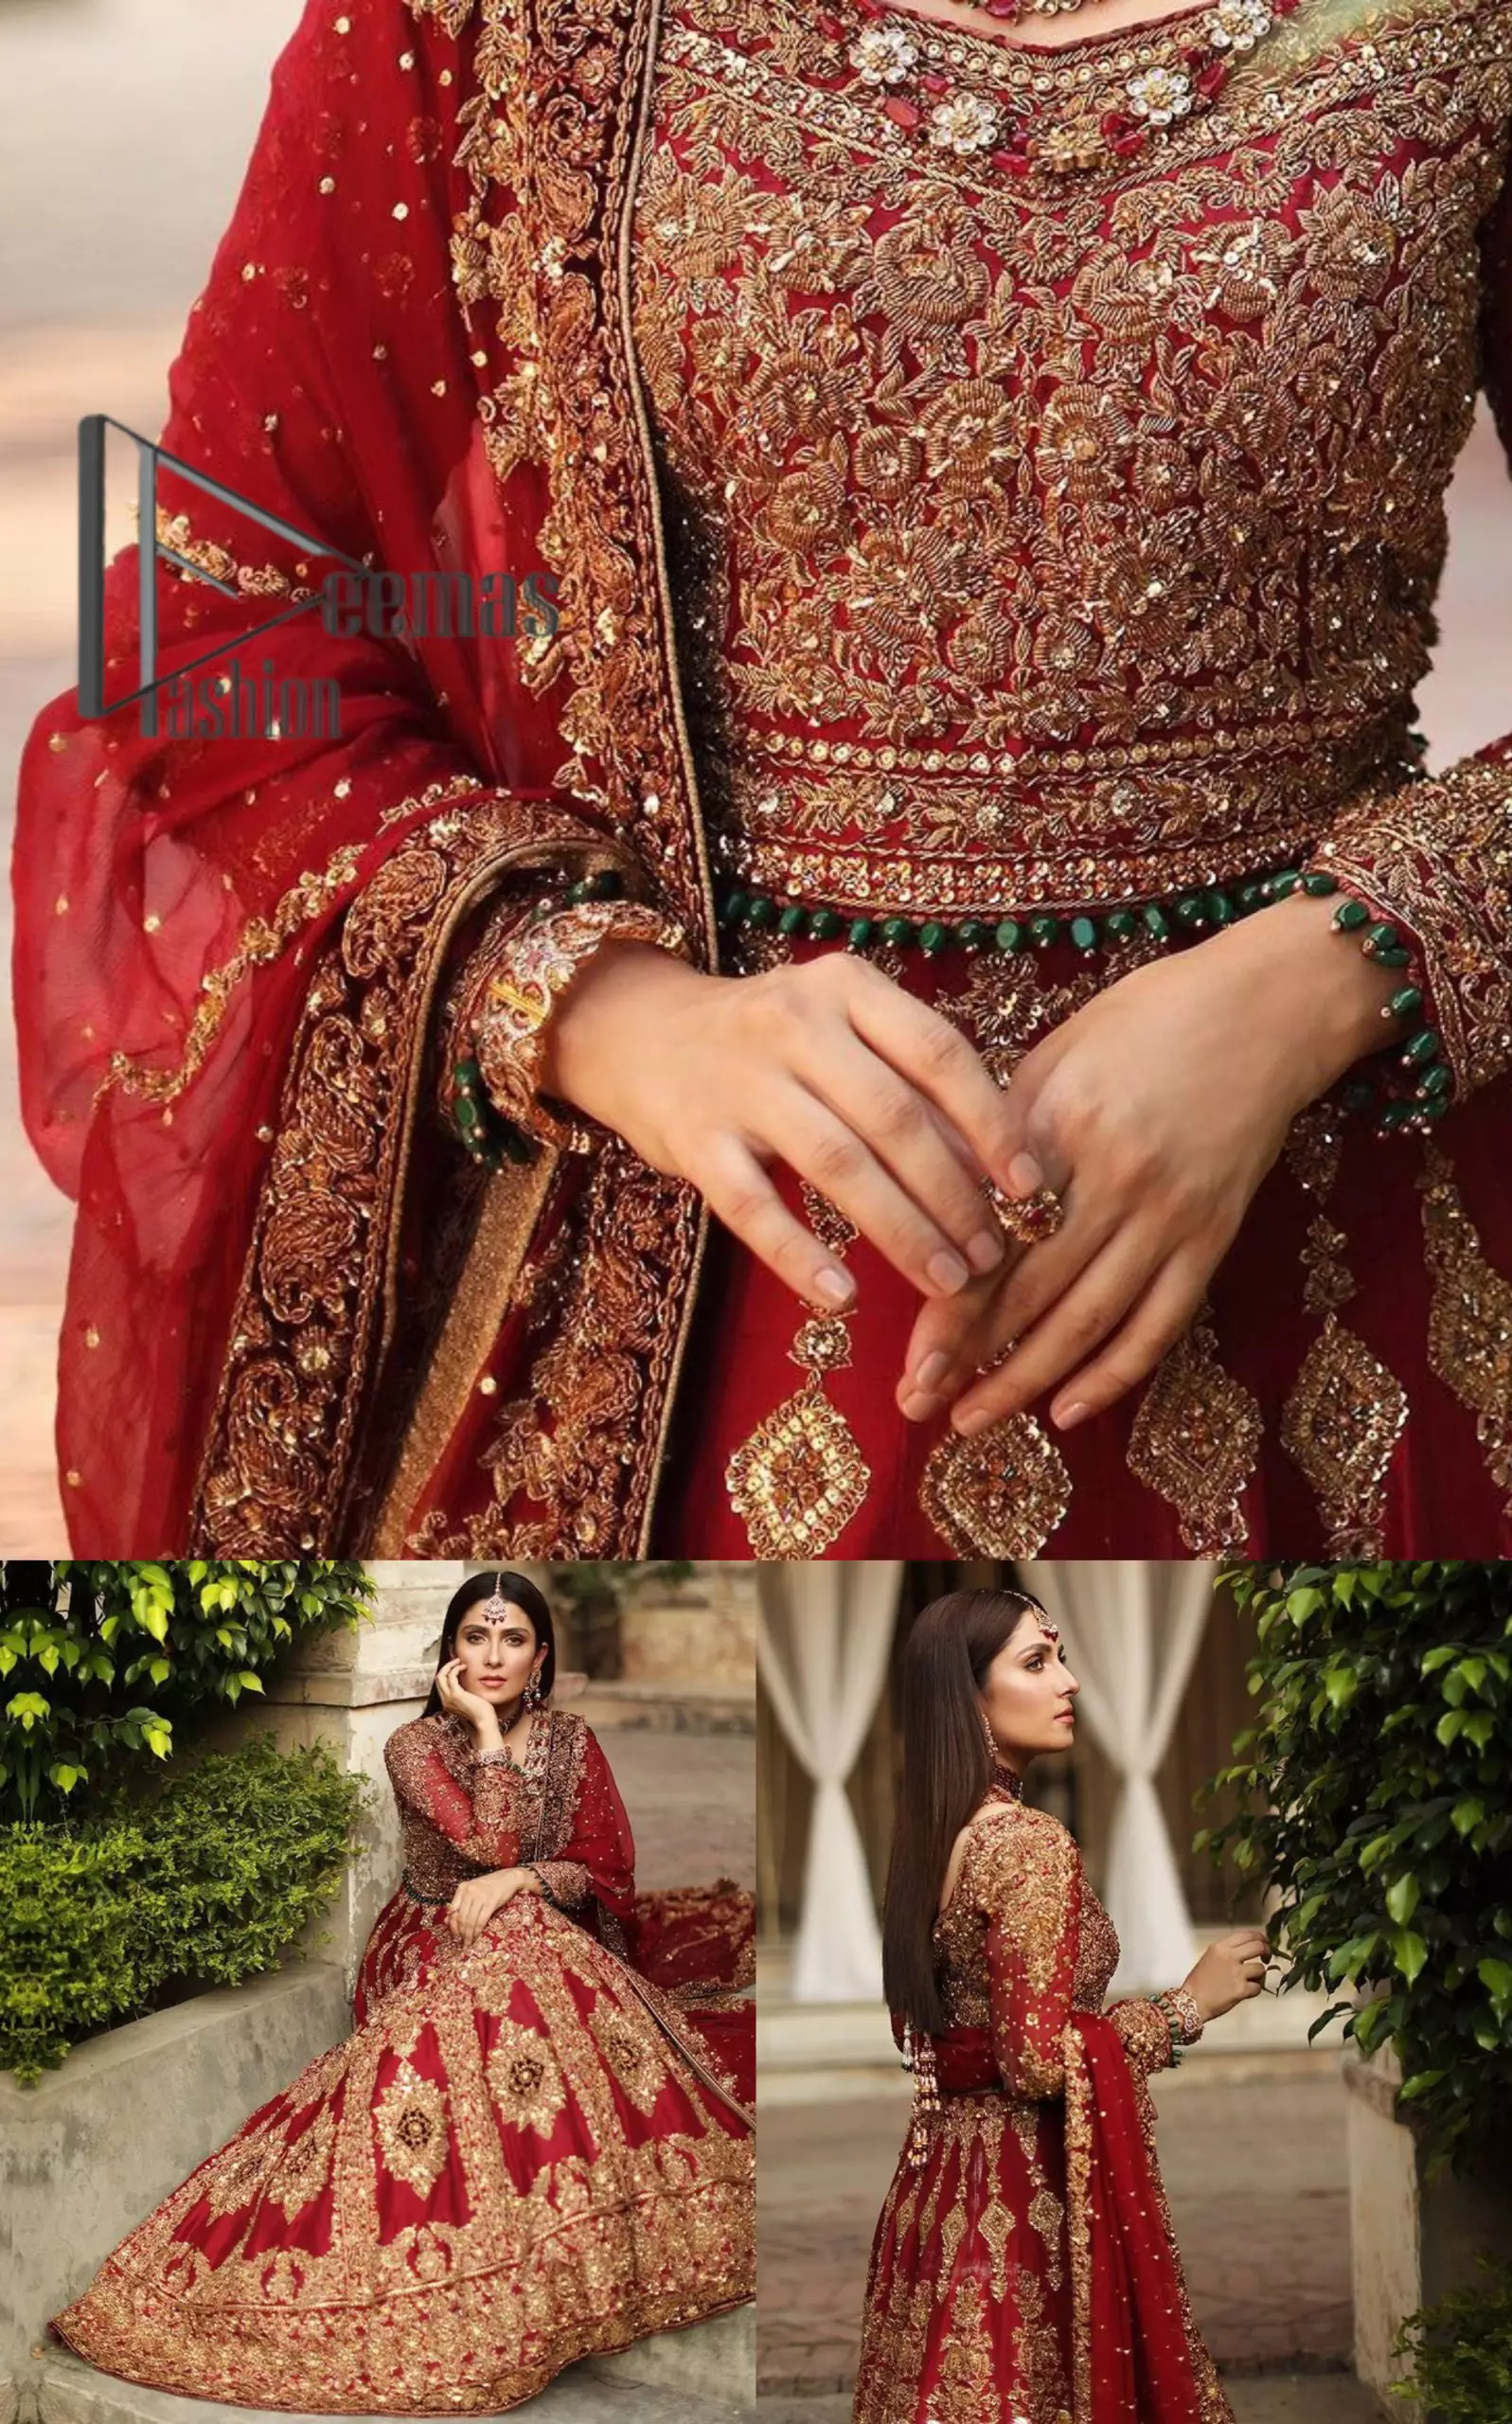 We're sure that all girls love slipping into "maroon outfits for weddings" So, we create this maroon article that will capture your moments on your big day. All details of the blouse are just amazing as it is adorned with golden tilla, kora, dabka embroidery. Just look closely at the boat shape neckline of the blouse that gives super-duper look when combine with full-length sleeves. Furthermore, it is coordinated with can can lehenga just to boost up your day by giving dreamy look. Conclude this maroon article with a chiffon dupatta that has four-sided embellished lace to capture your moments.